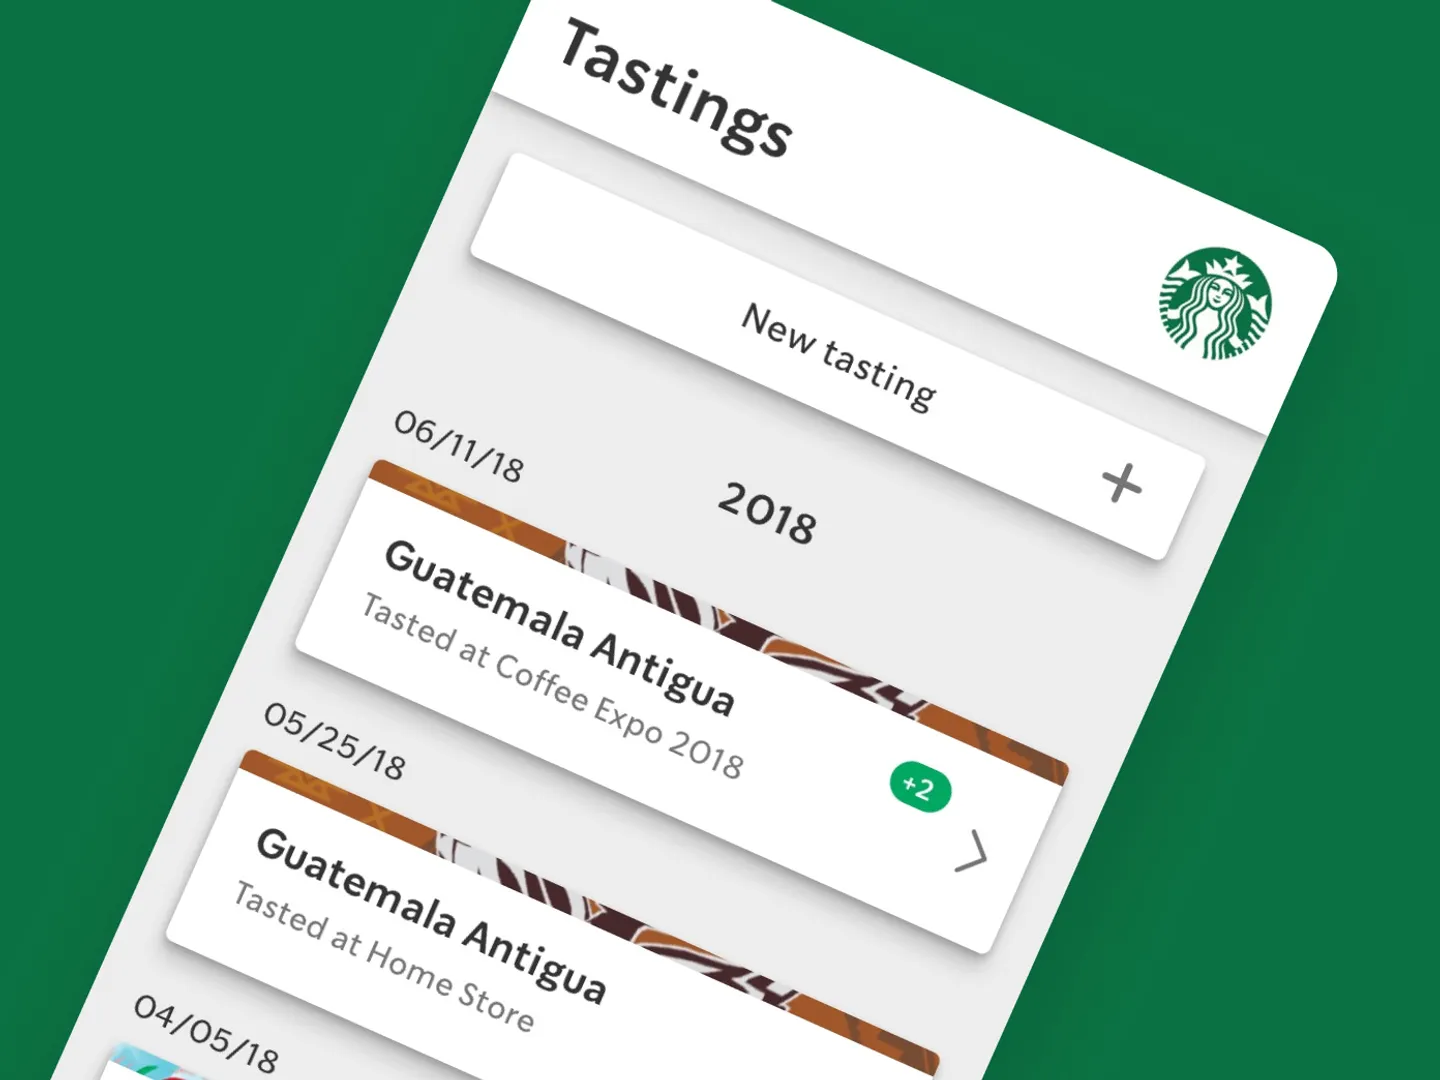 Image of an app screen showing tasting notes cards